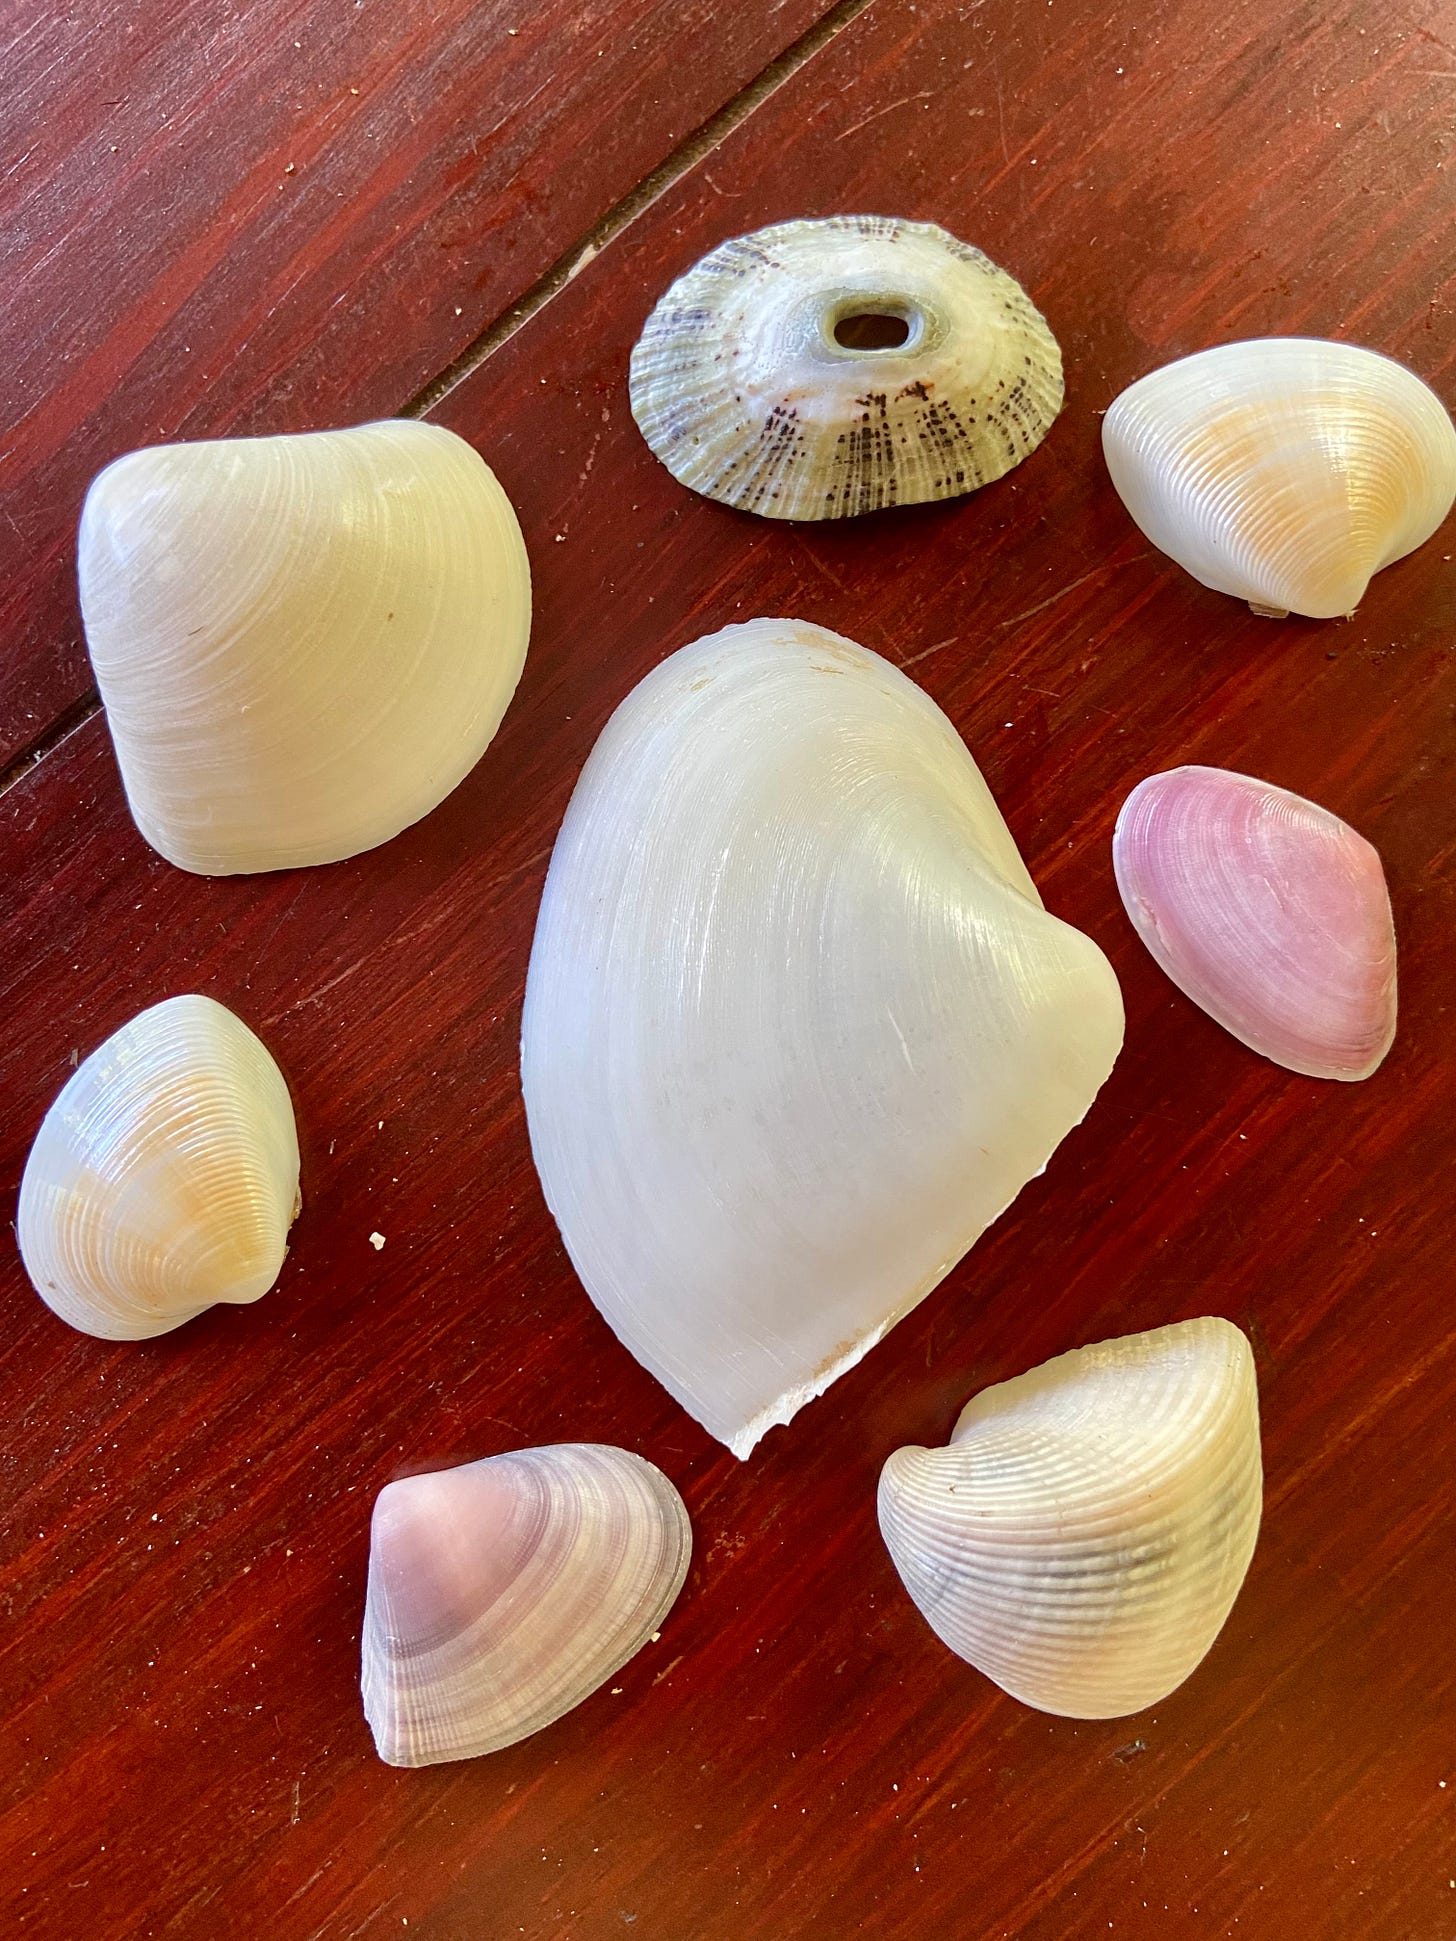 sea shells laid out on table